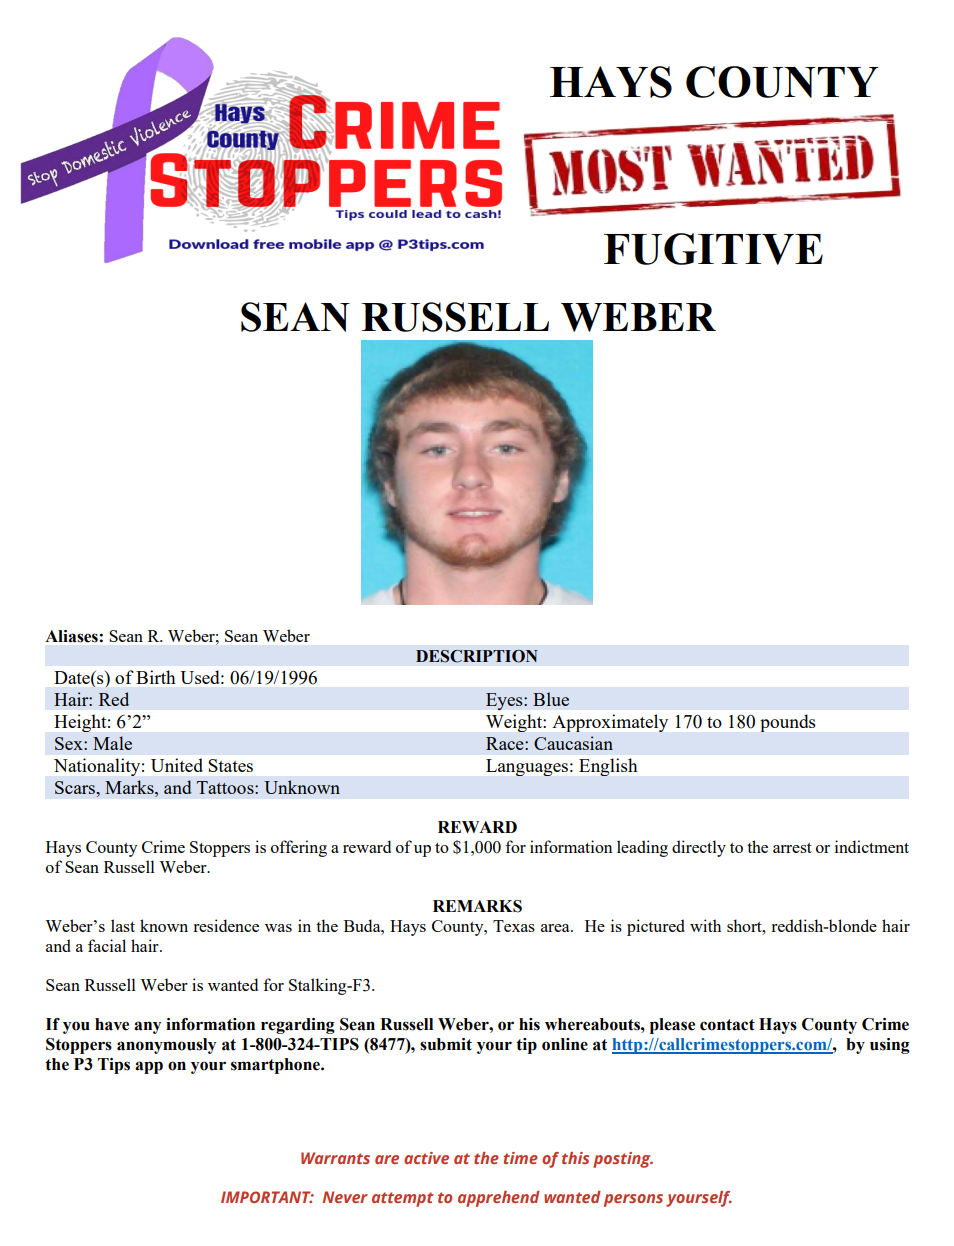 Weber most wanted poster 